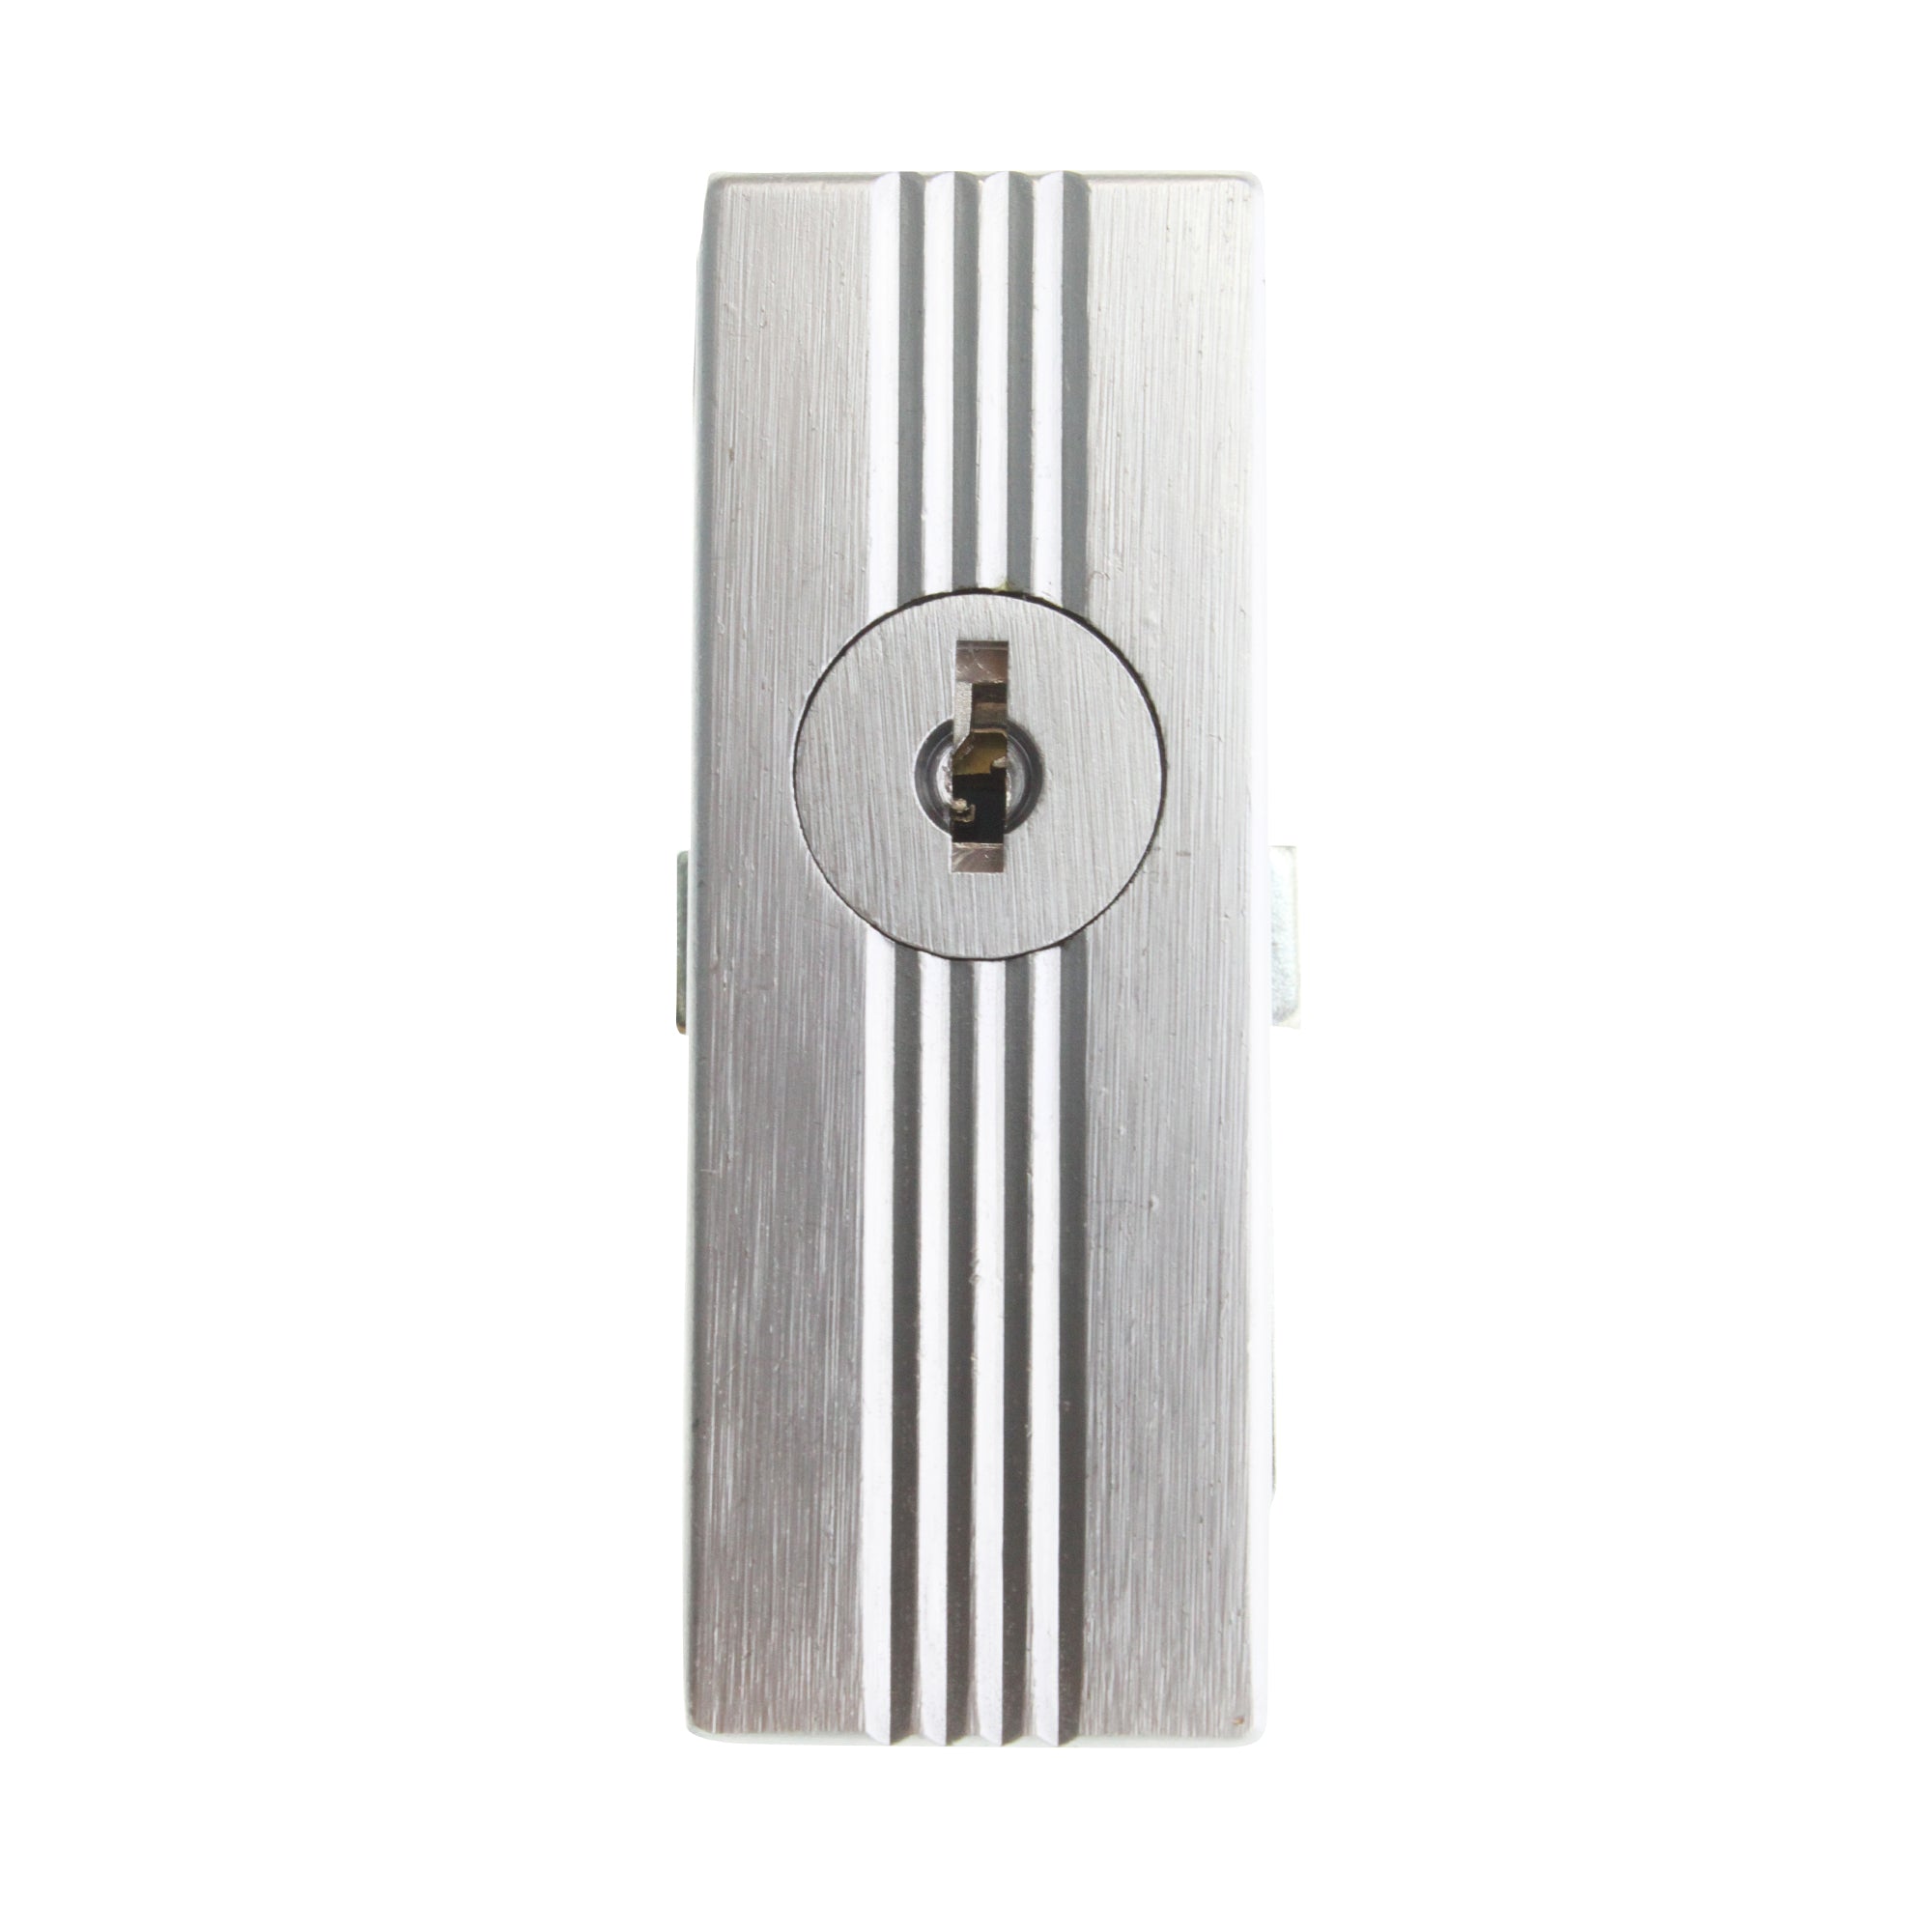 CCL SECURITY PRODUCTS, CCL SECURITY 15867 PANELBOARD UNIVERSAL  KEYED LOCK FOR 18- 22 GAUGE METAL